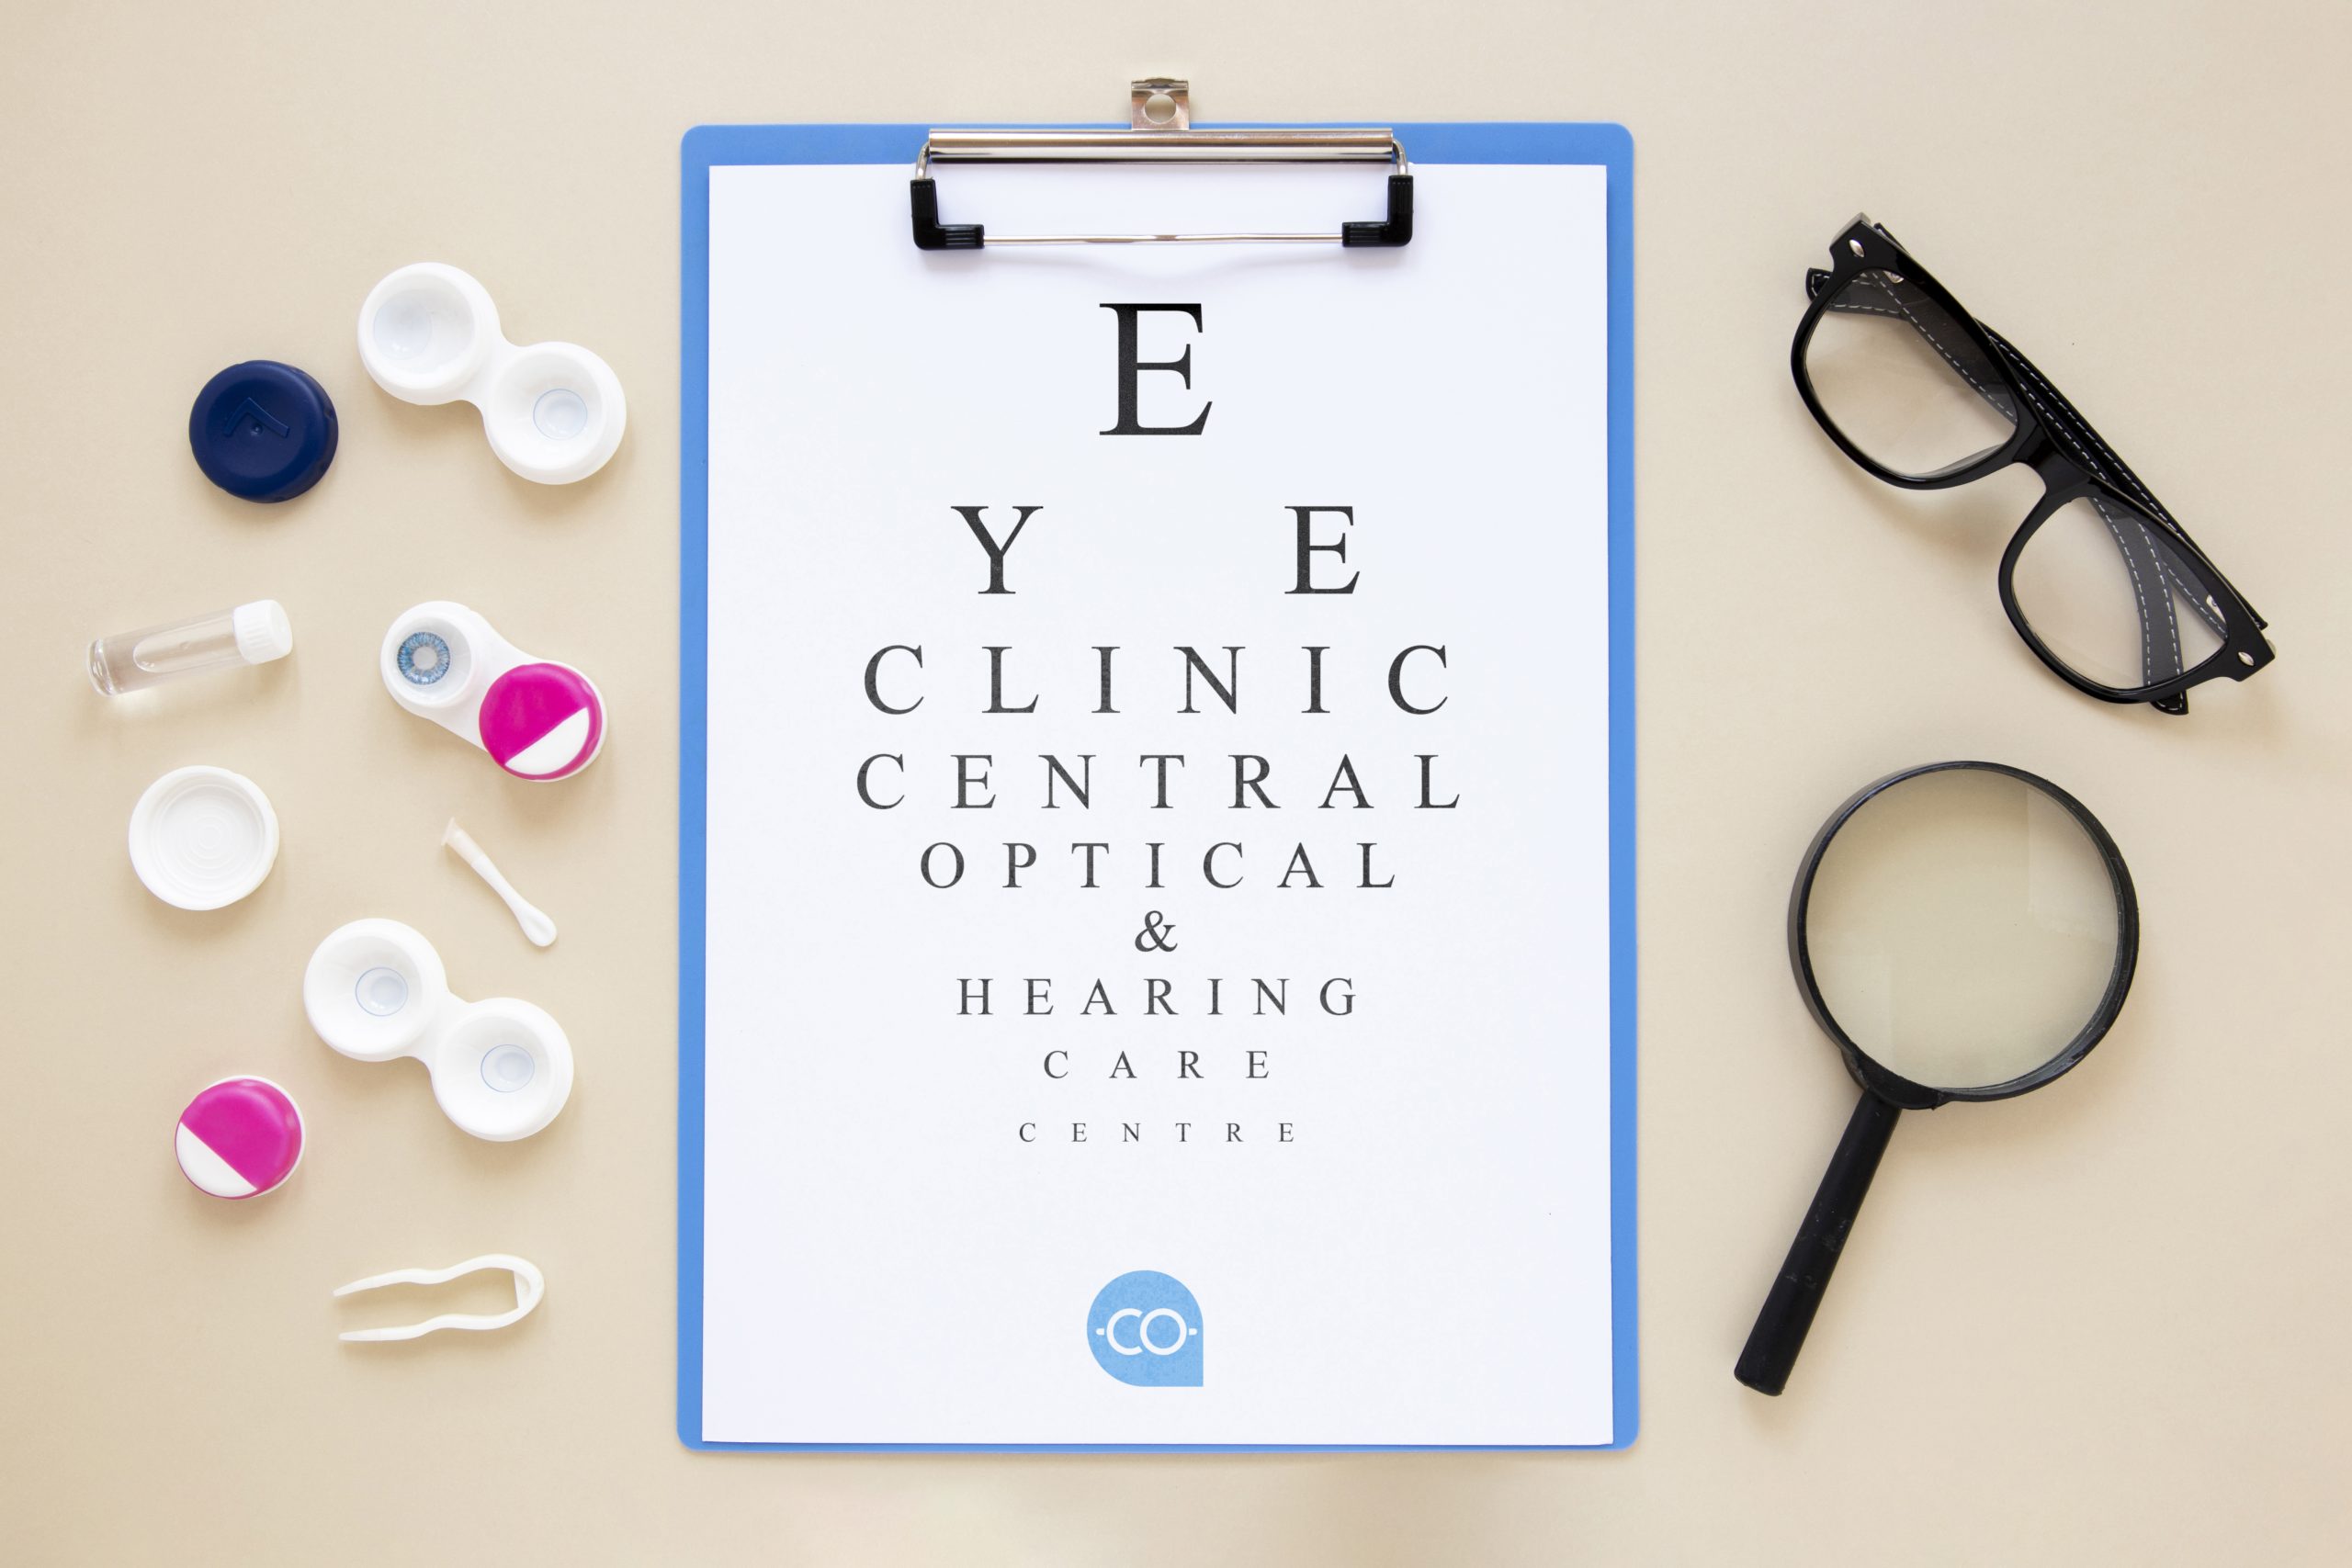 Our Eye clinic at Central Optical is a state-of-the-art facility offering a wide range of eye care services for patients of all ages. Our team is comprised of highly skilled optometrists, opticians, and support staff who are dedicated to providing the highest level of care to each patient who walks through our doors.